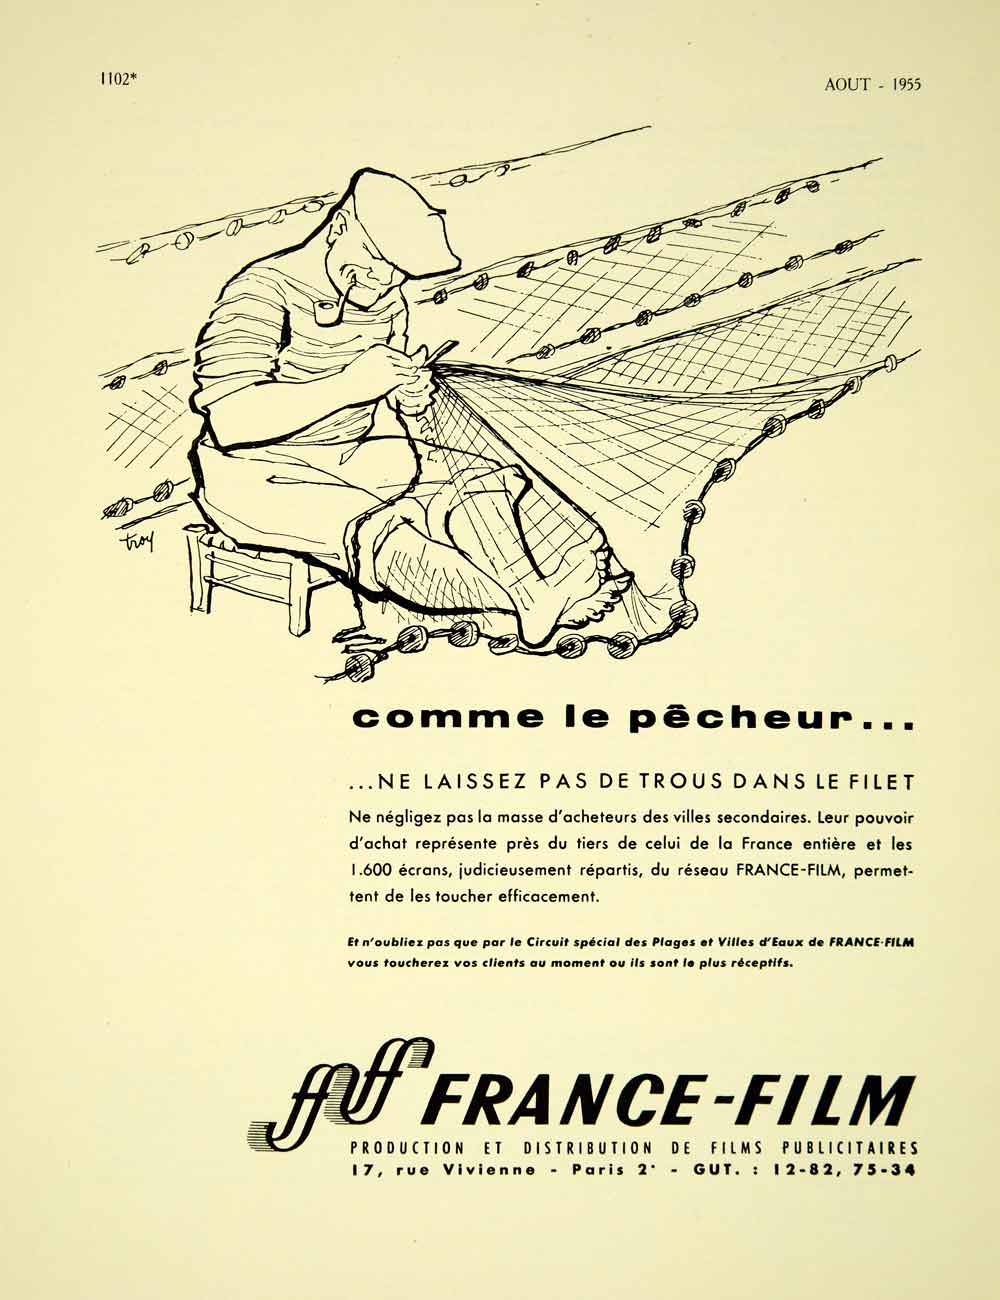 1955 Lithograph Ad France-Film French Advertising Fisherman Mending Net VENA4